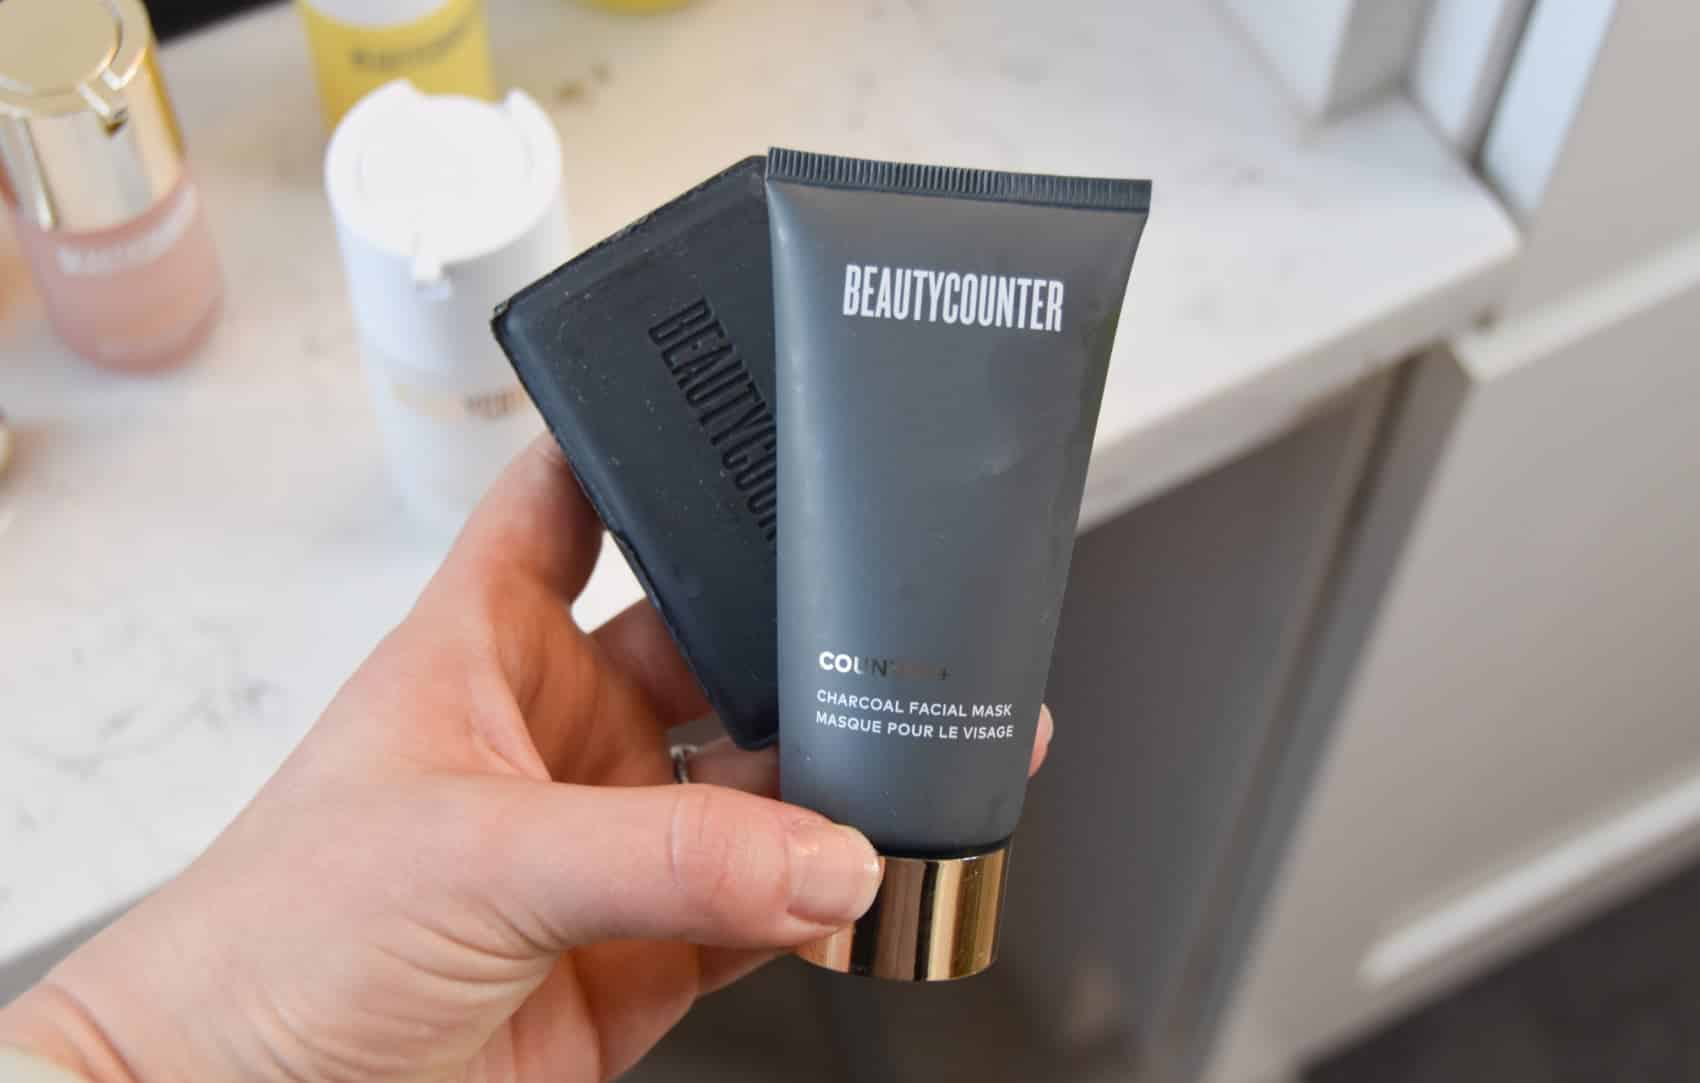 Holding onto the beautycounter charcoal mask and charcoal bar.